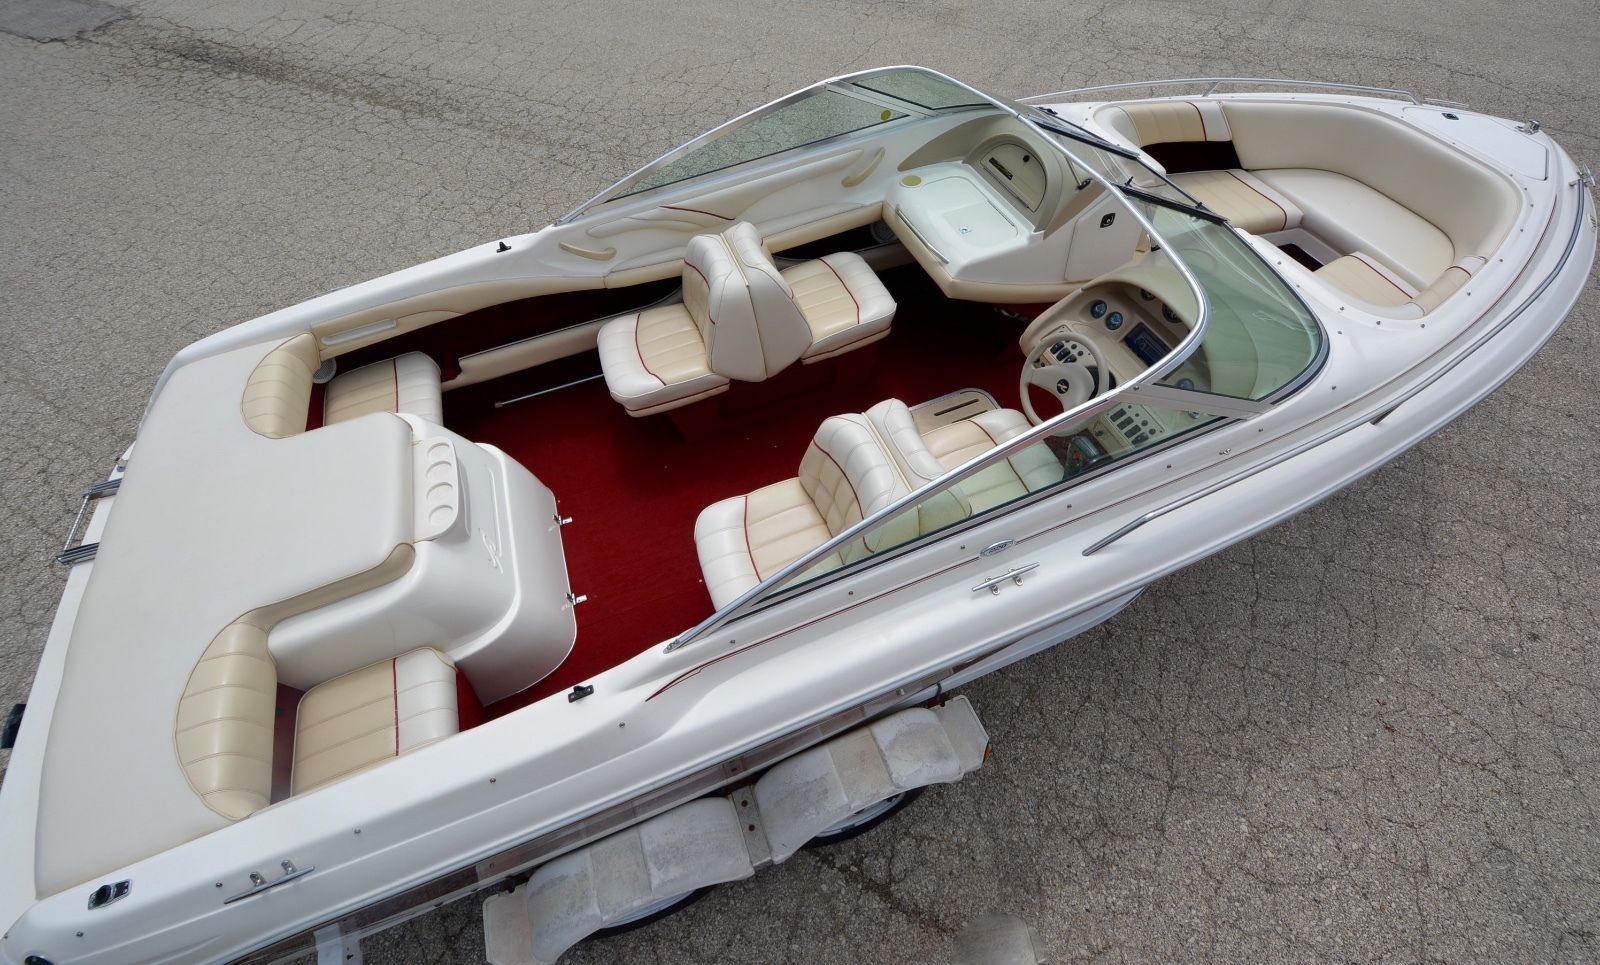 SeaRay 22' Signature 220 W/ 5.7 V8 SHOWS LIKE A 1-2 YEAR OLD BOAT!